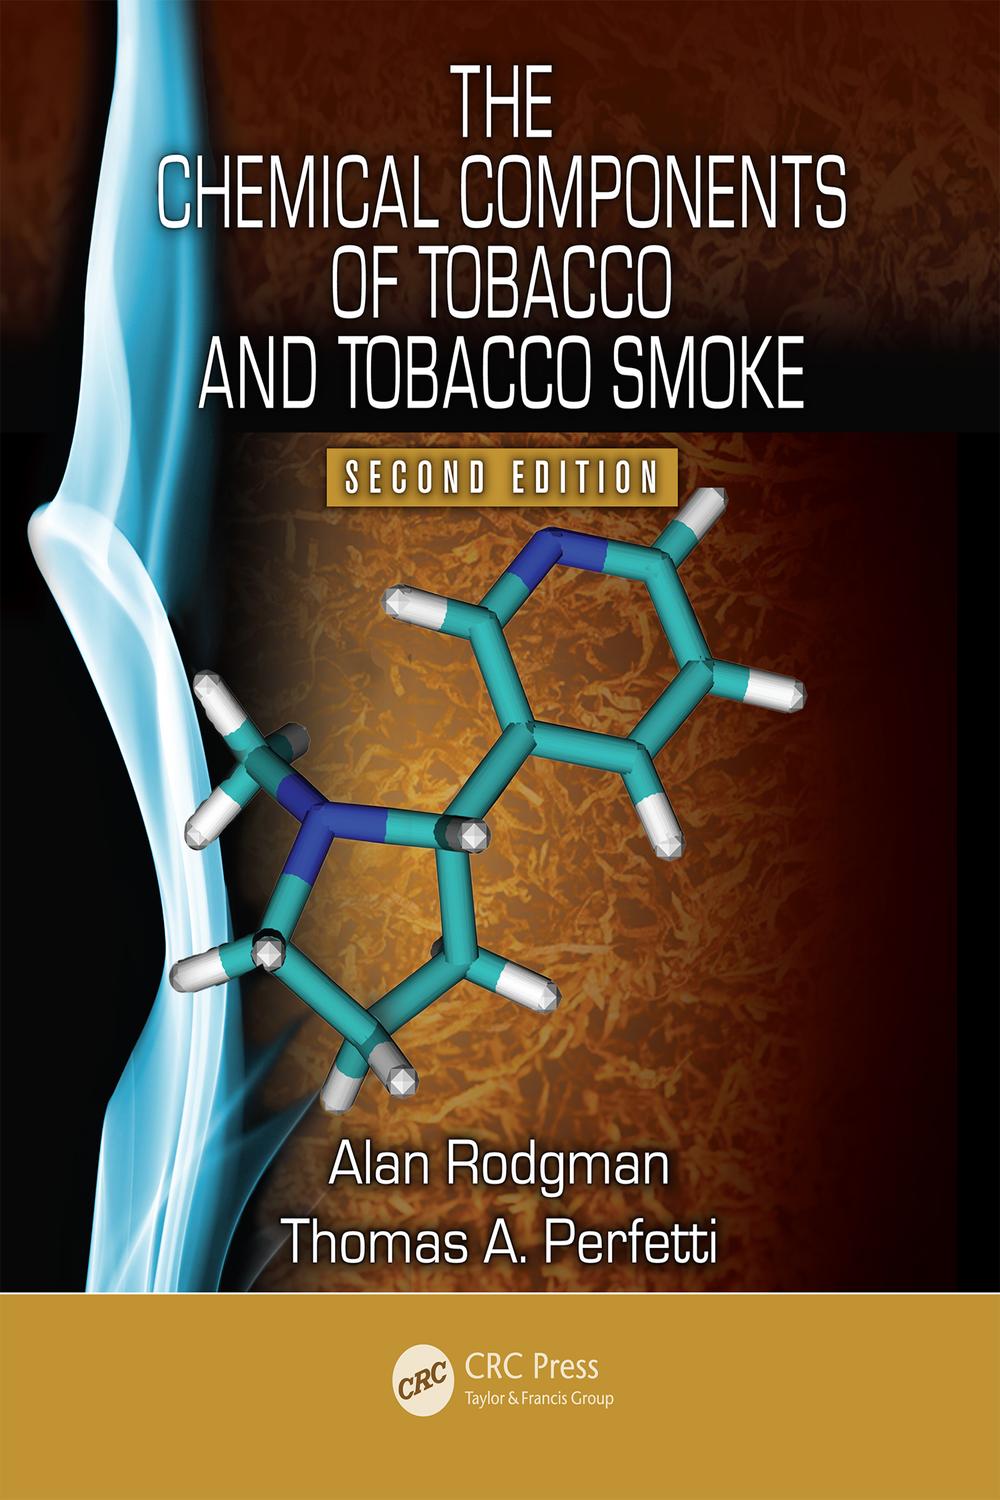 The Chemical Components of Tobacco and Tobacco Smoke - Alan Rodgman, Thomas A. Perfetti